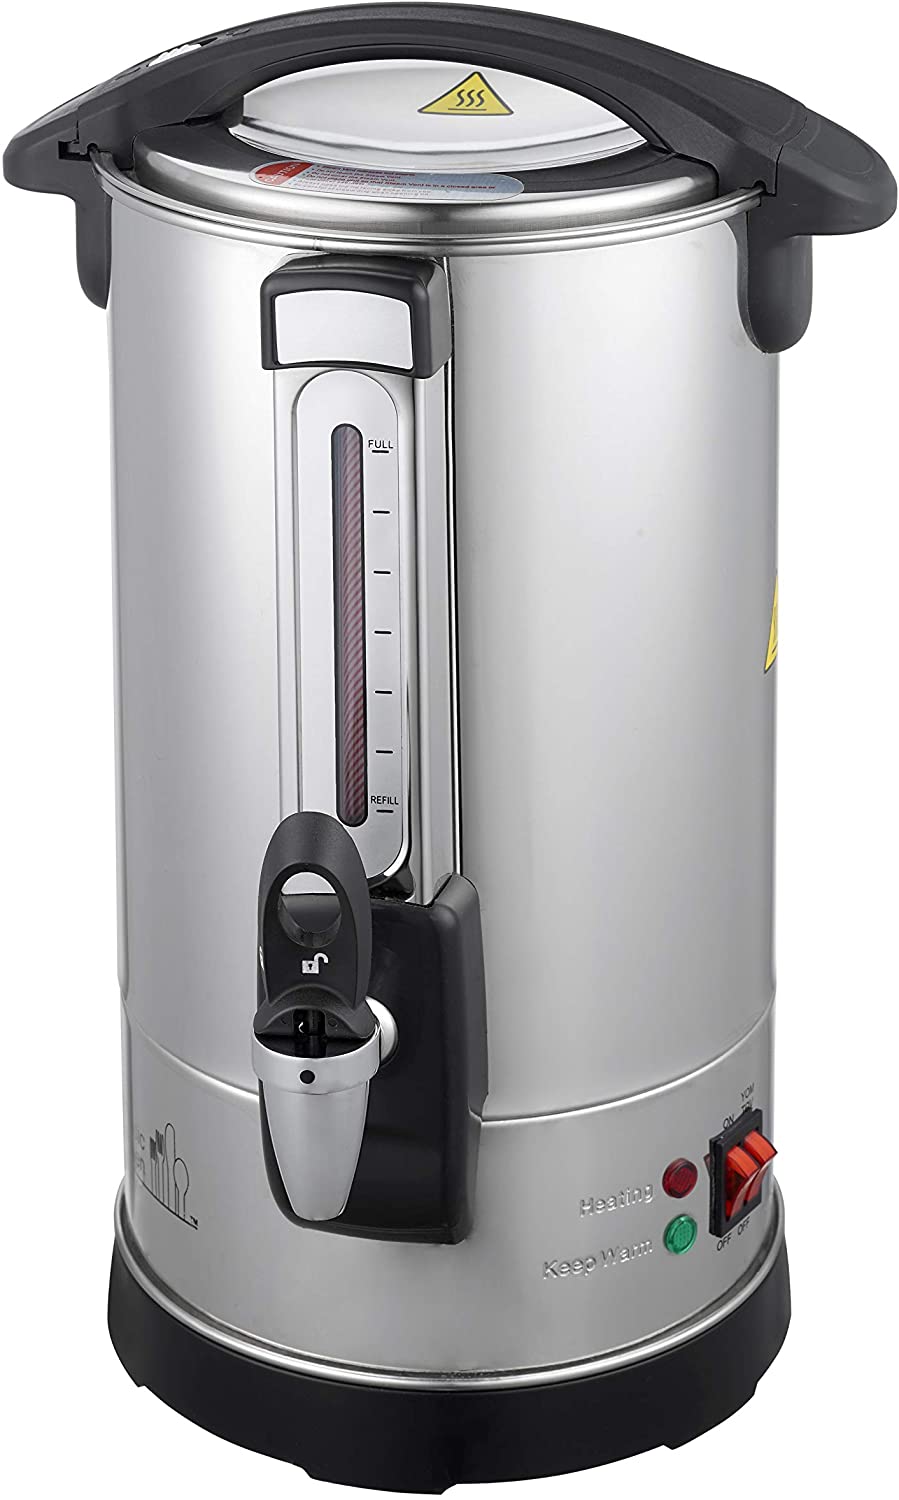 Stainless Steel Hot Water Boiler & War Shabbat Automatic Coffee Urn 40 Cups  